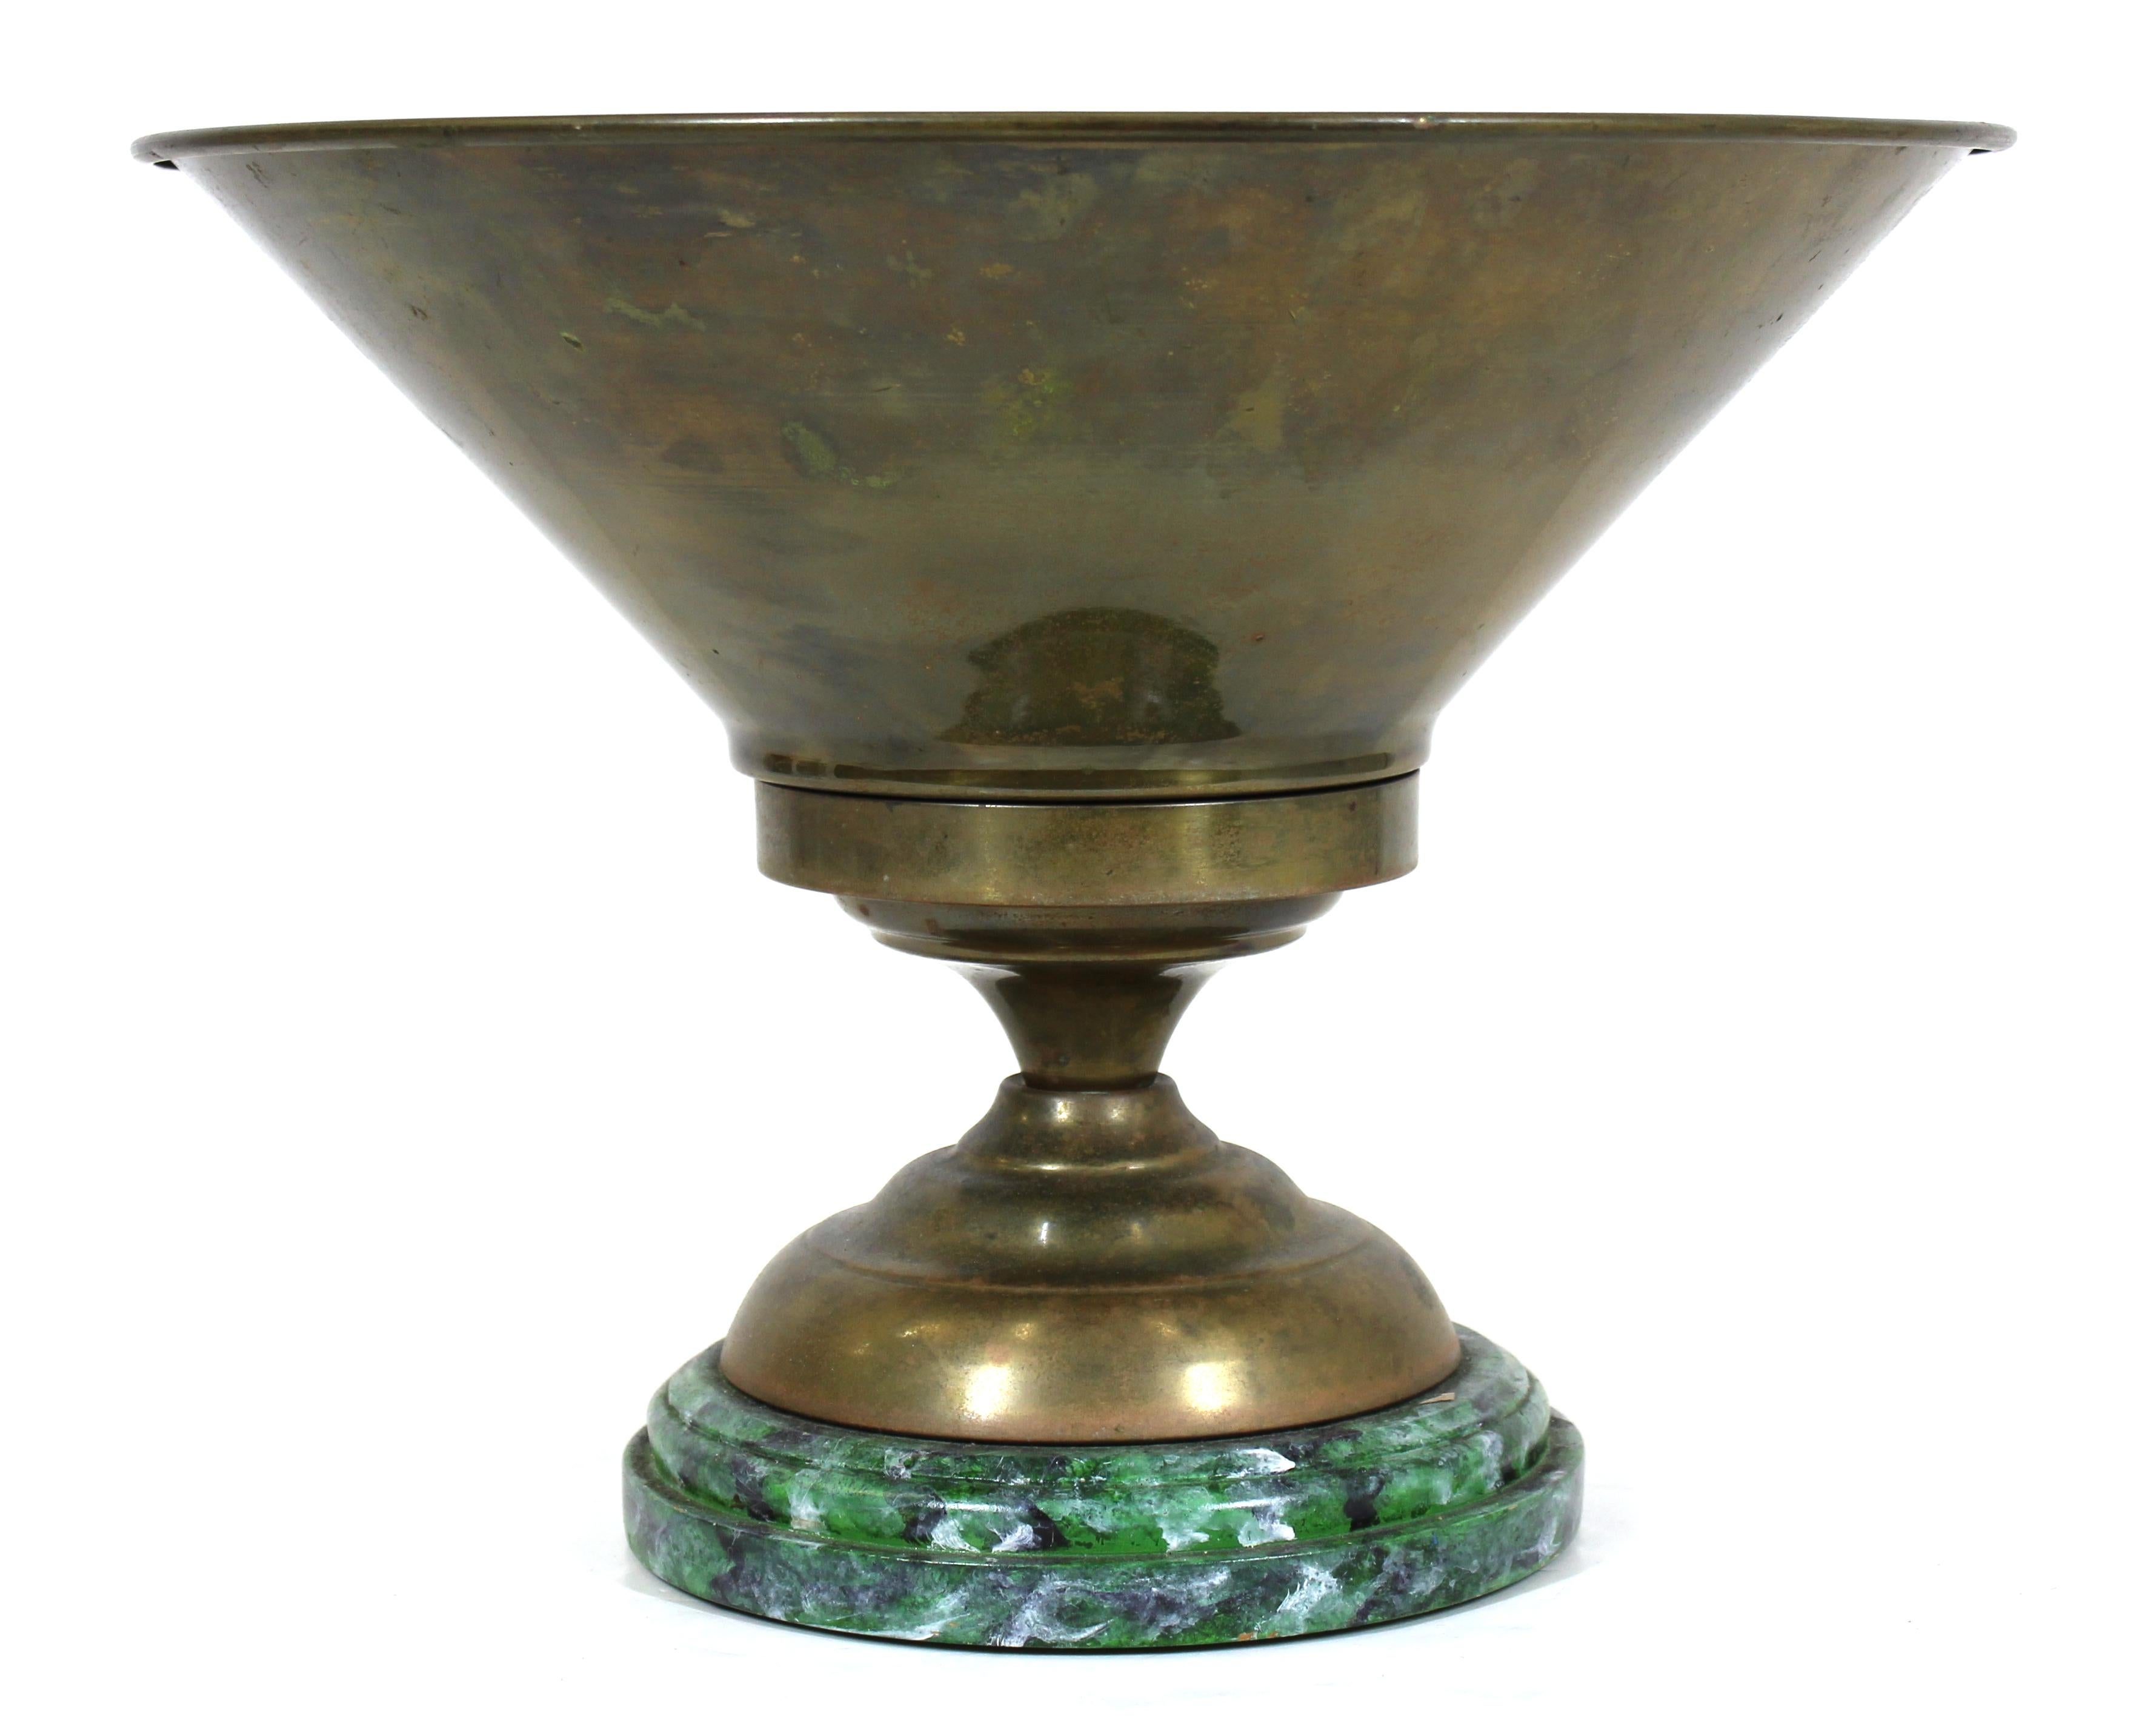 Neoclassical Revival style brass jardinière planter on faux-marble painted round wood base. Measures: 12.5